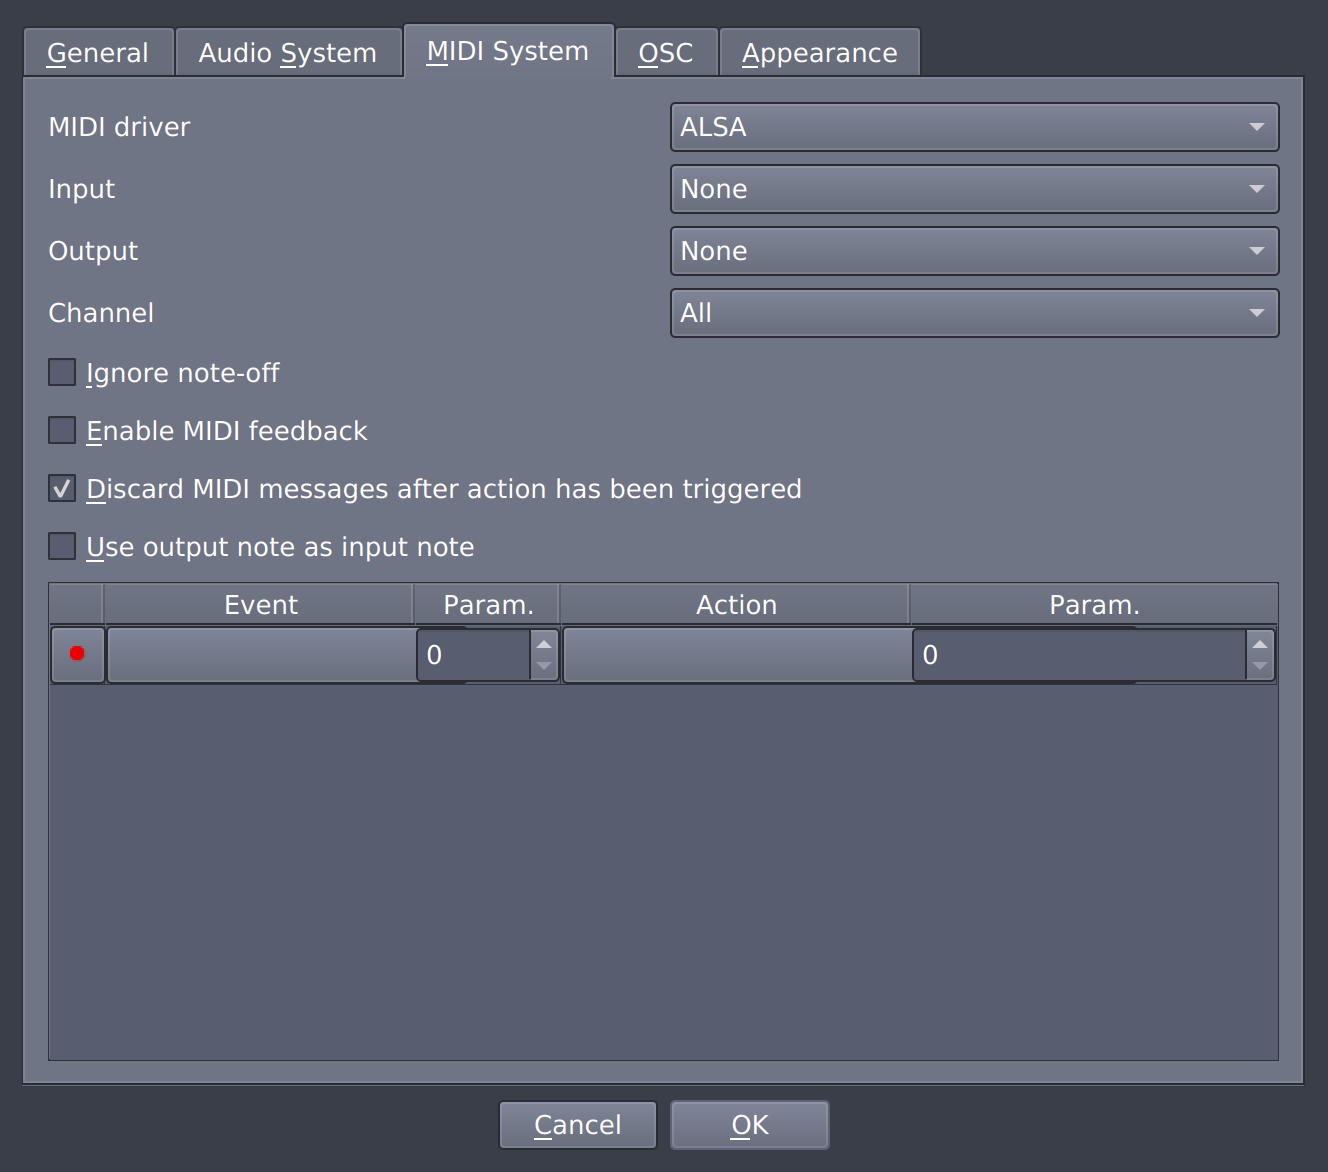 MIDI Actions are set in MIDI System tab of the Preferences Dialog